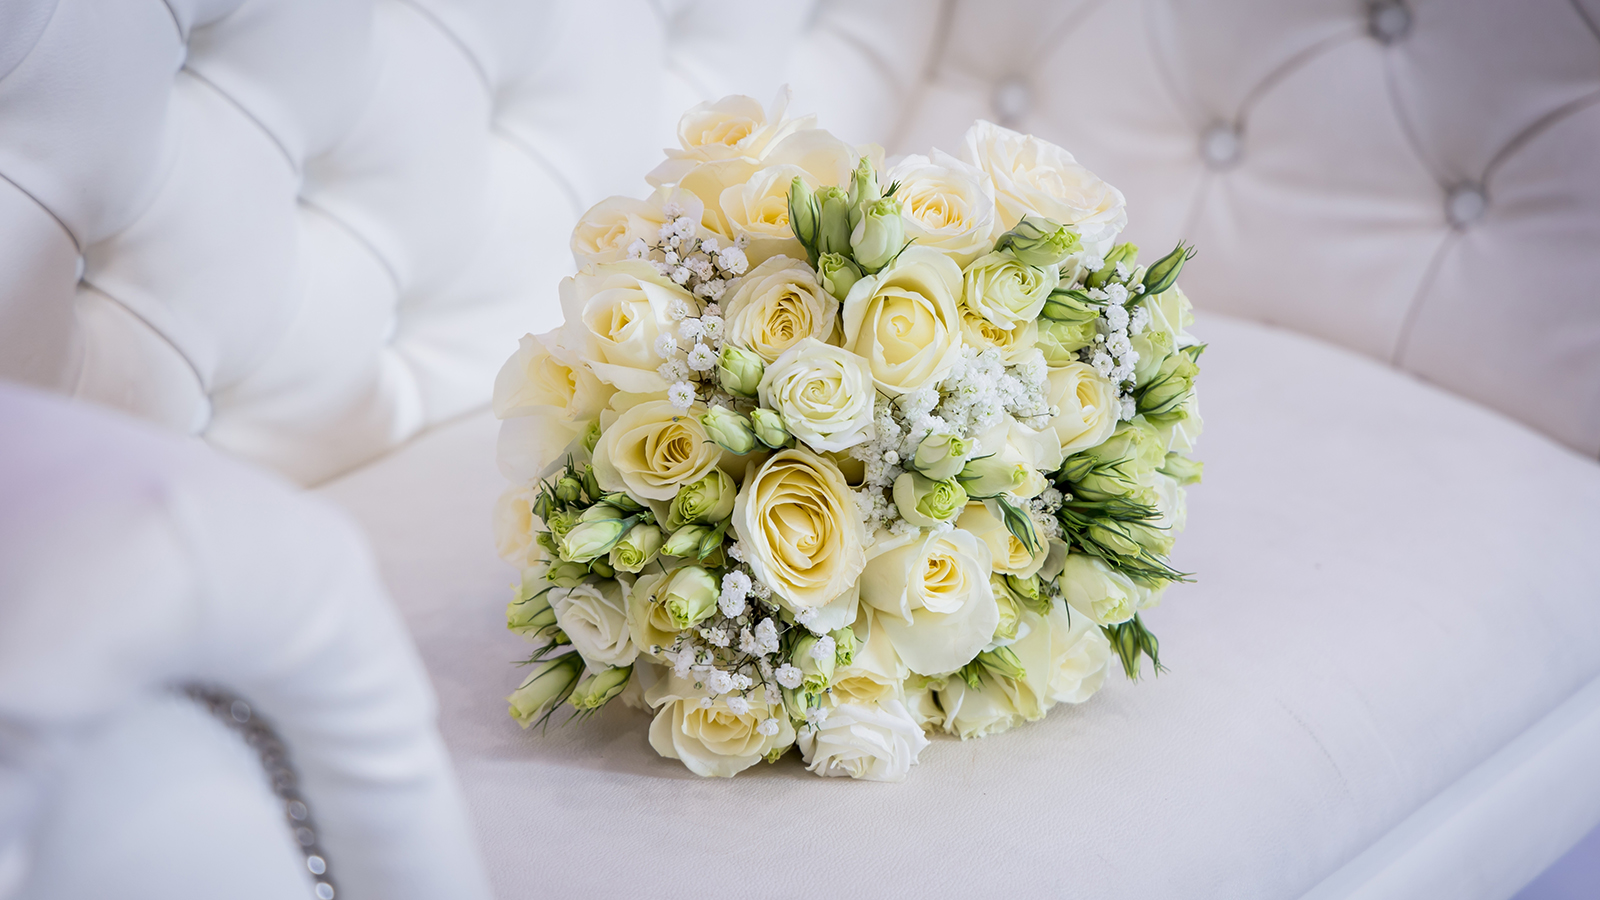 Orthodox Hasidic Jewish wedding bride chair with flowers for traditional event. Cream and white background with orchids, roses, petals and leaves.